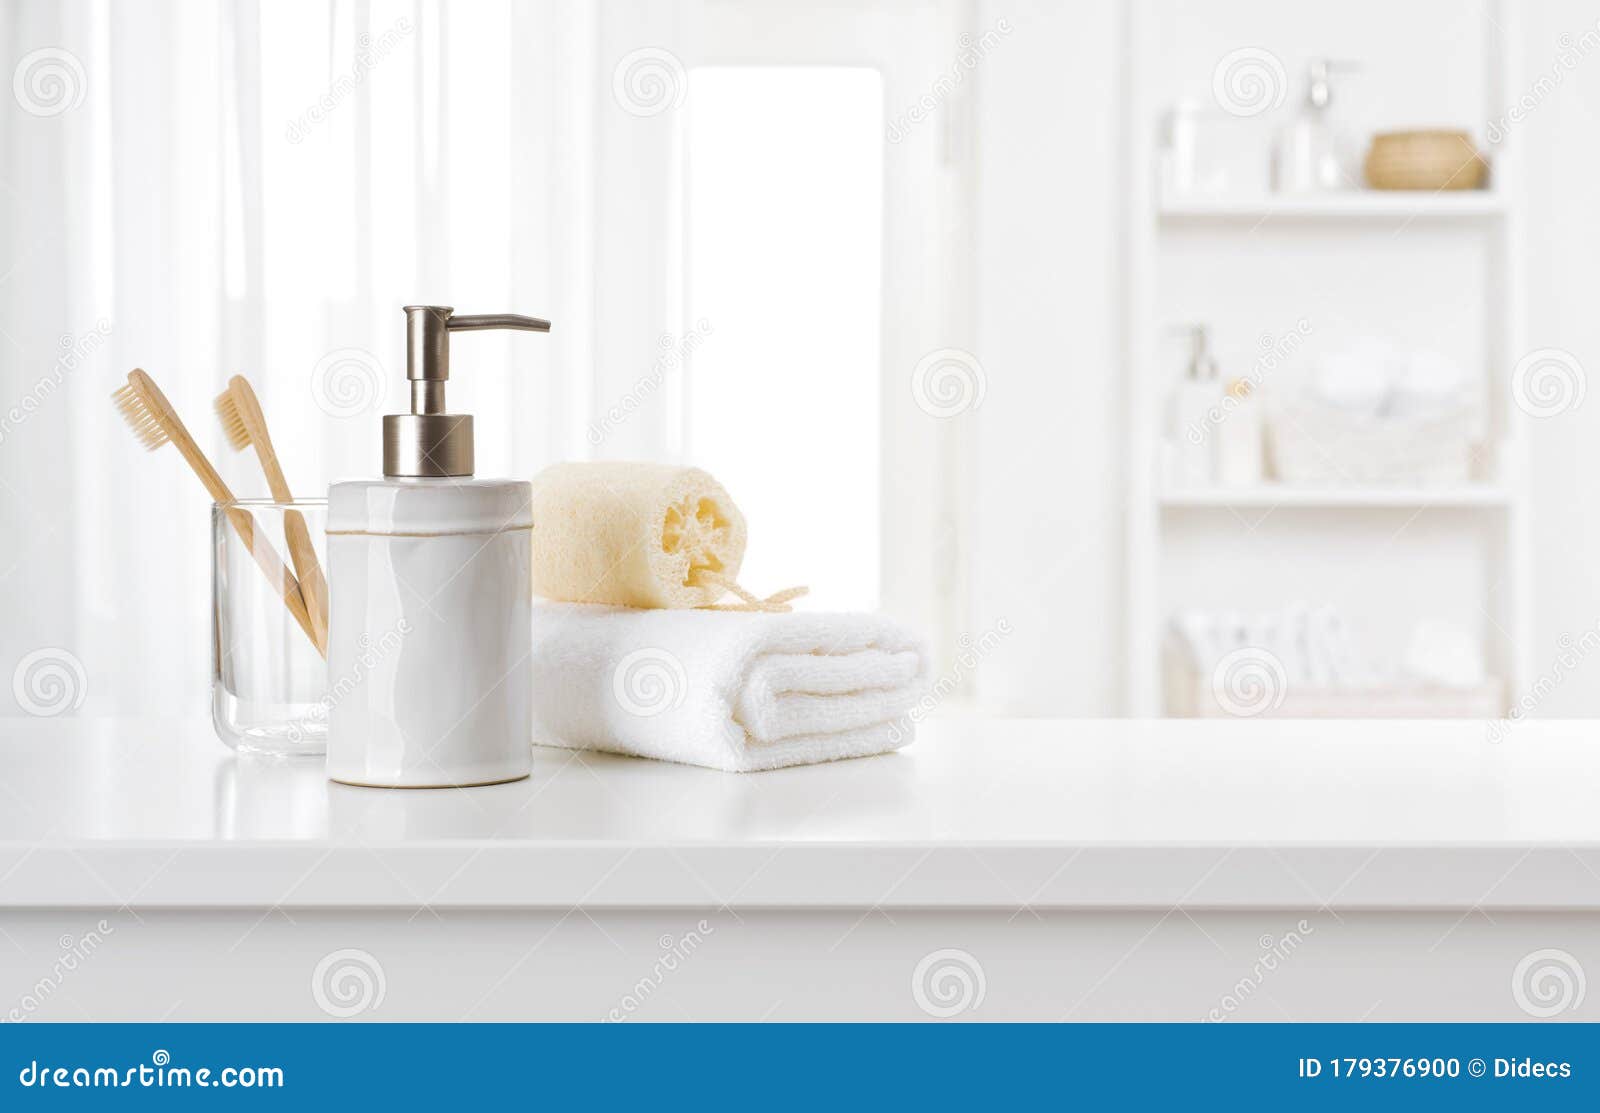 soap dispenser, toothbrushes and white towel on bathroom counter interior